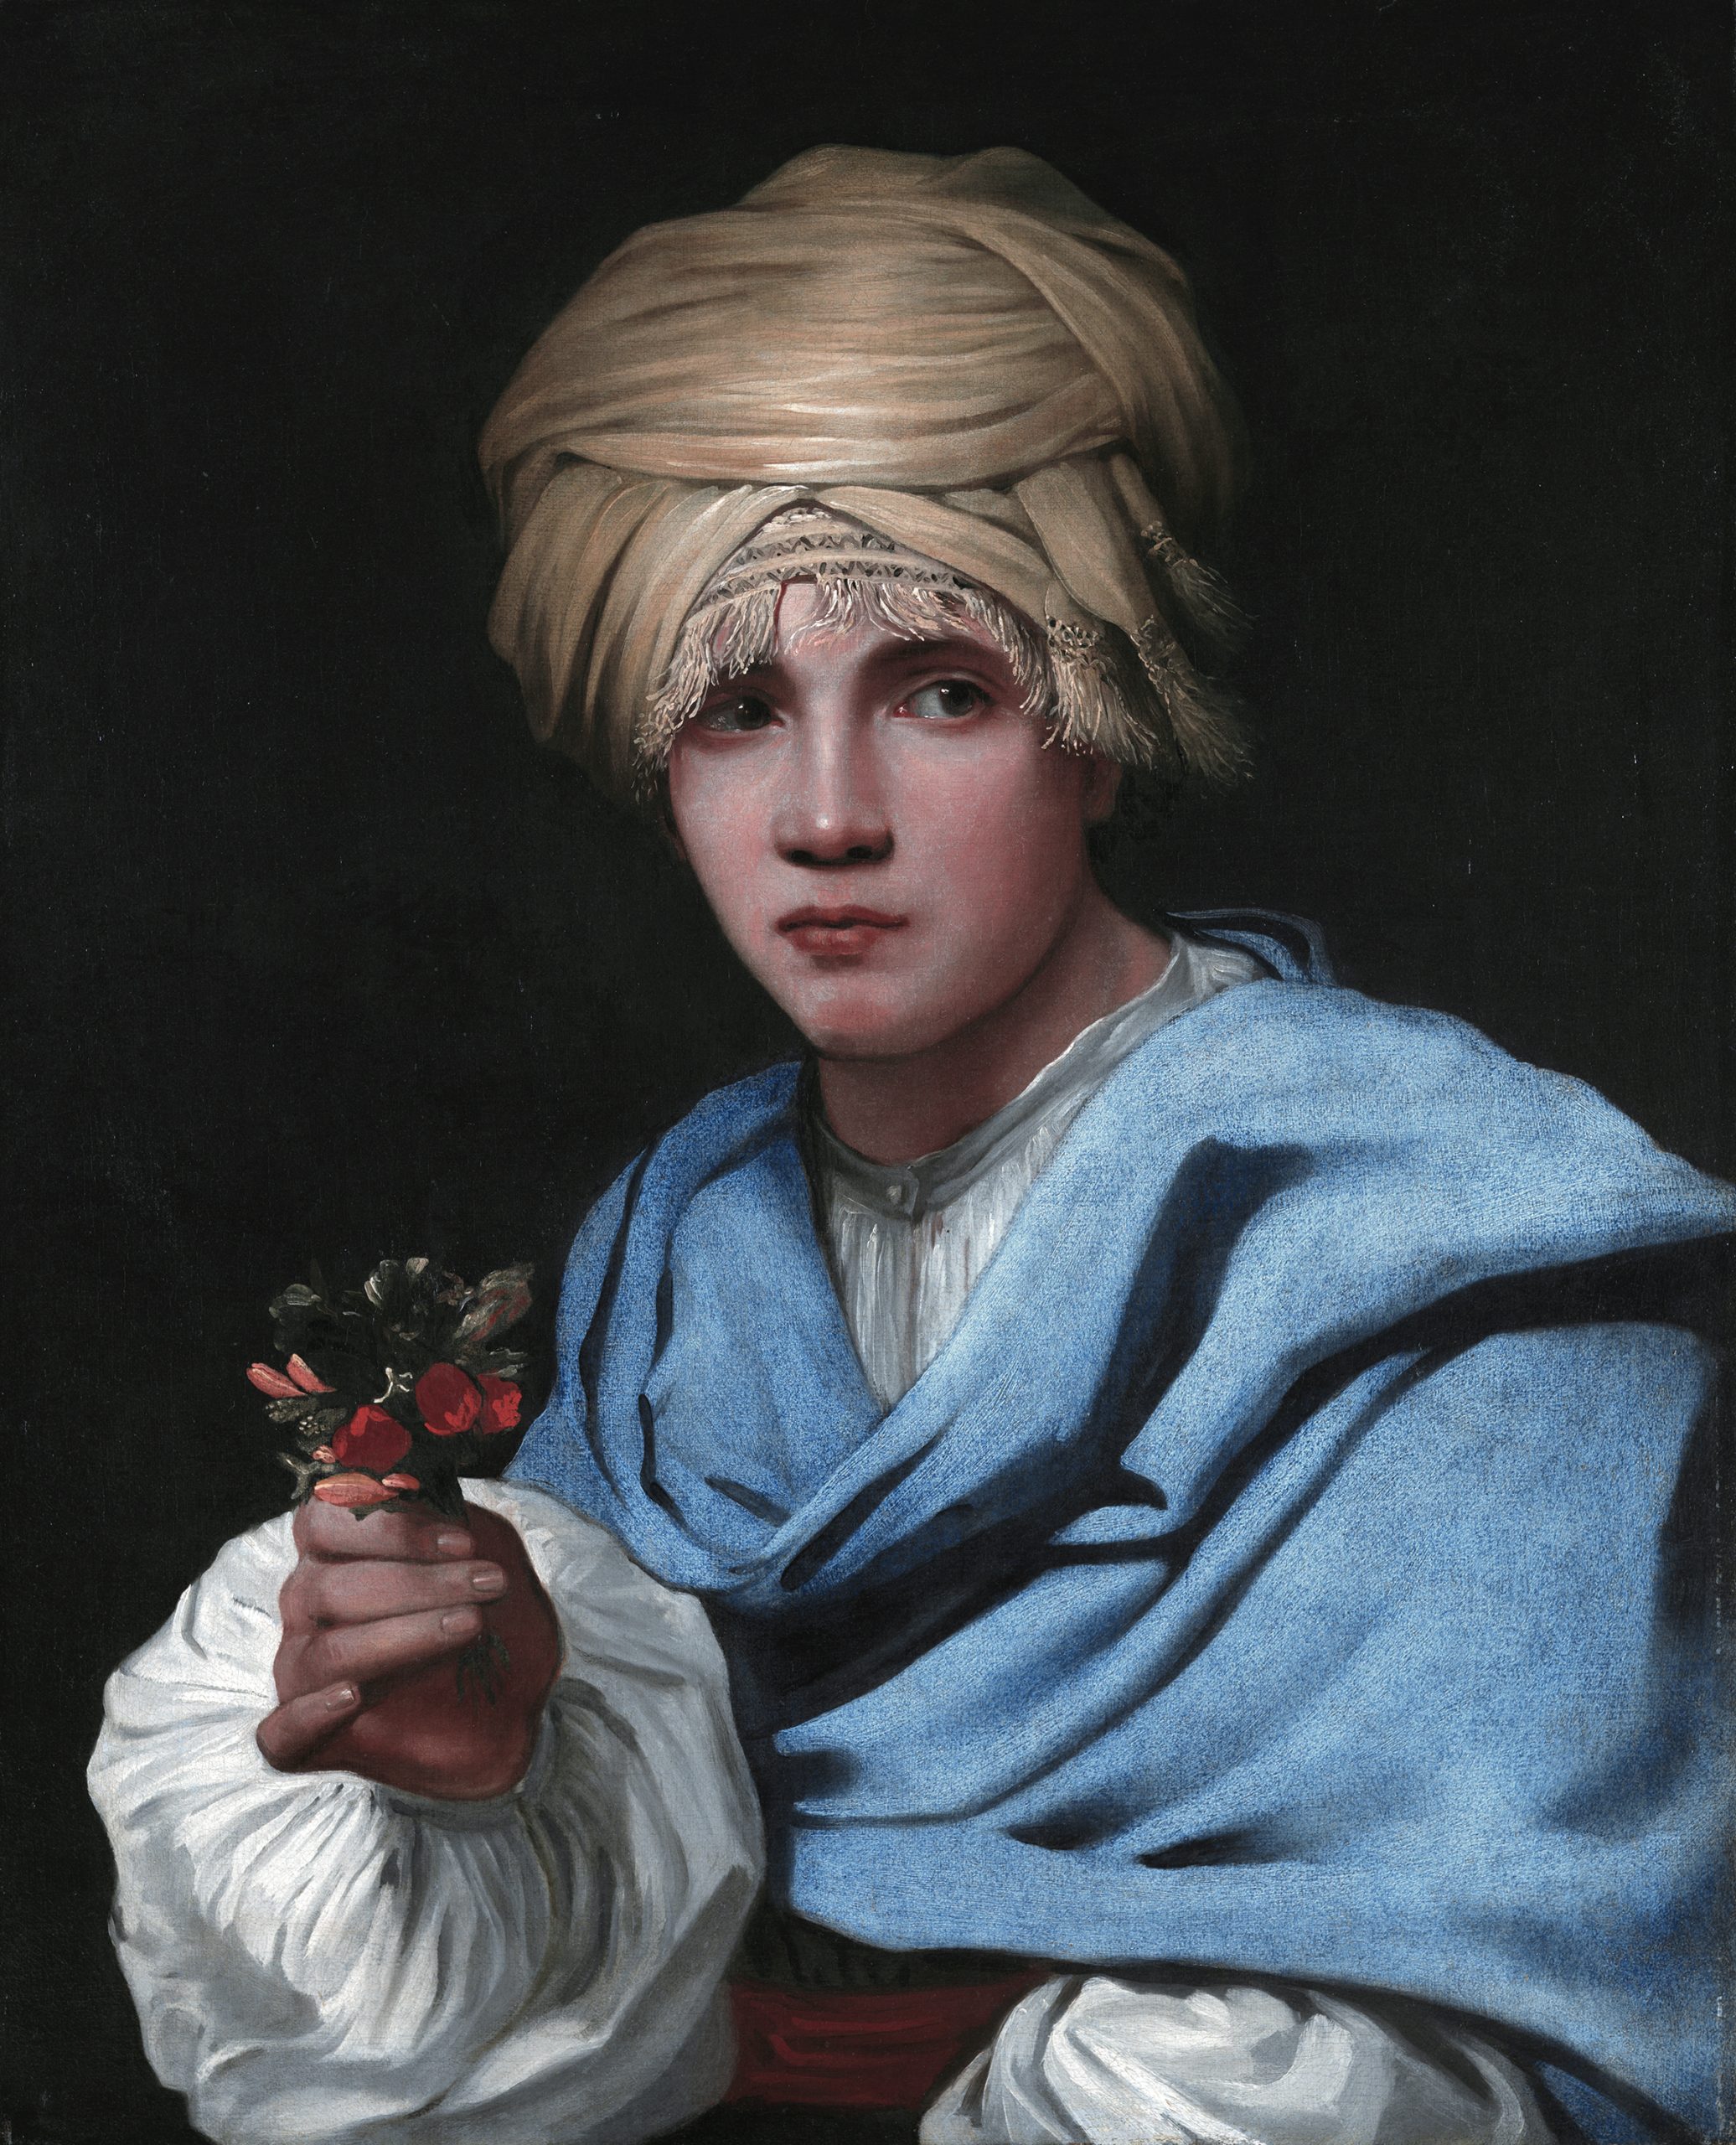 Boy in a Turban Holding a Nosegay – Michael Sweerts